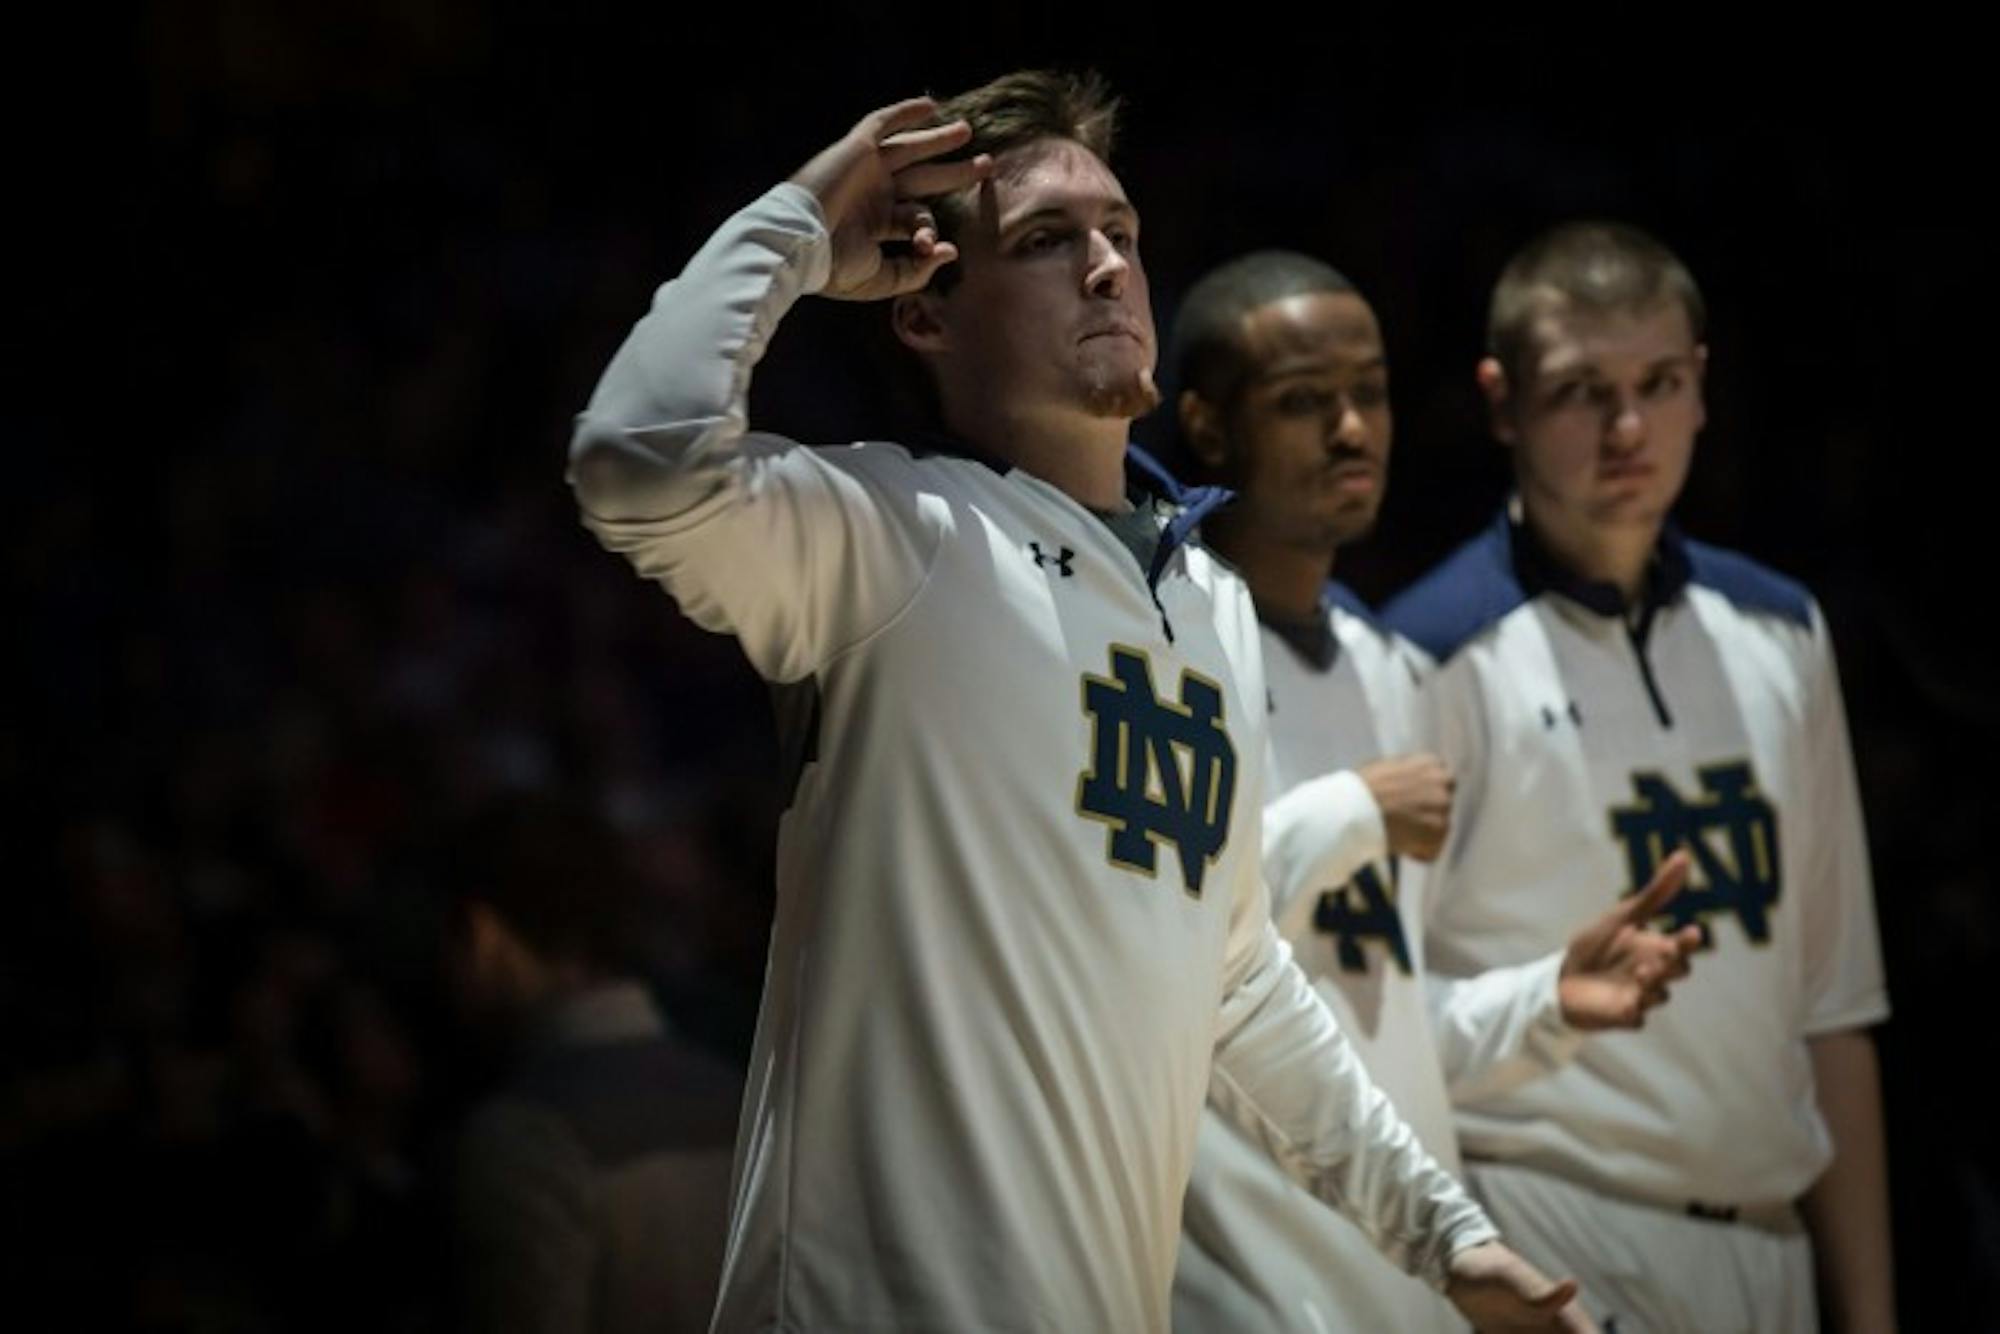 Irish senior captain Pat Connaughton greets his teammates during introductions before Wednesday's game.